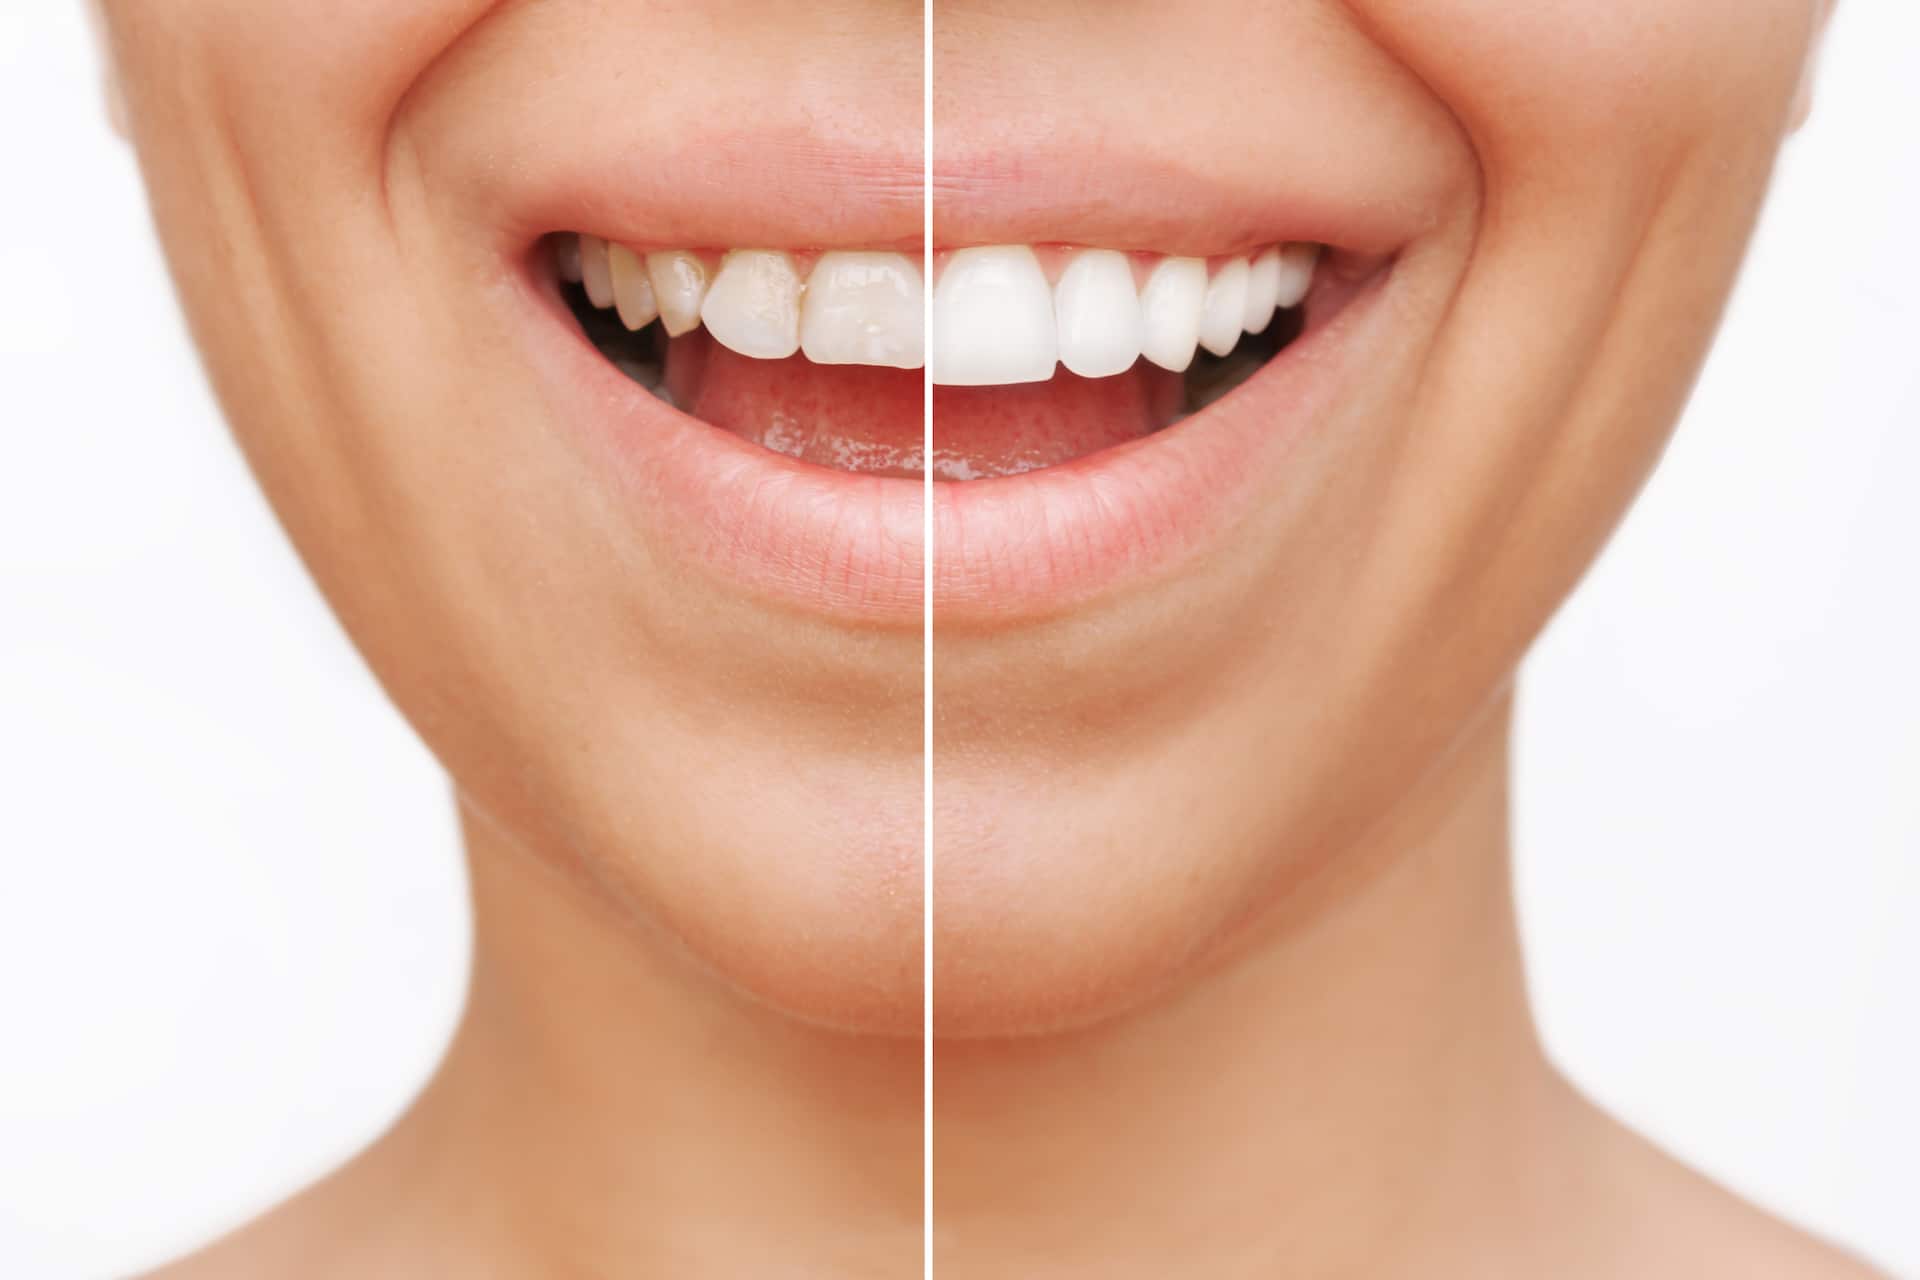 Before and after veneers cosmetic dentistry treatment.